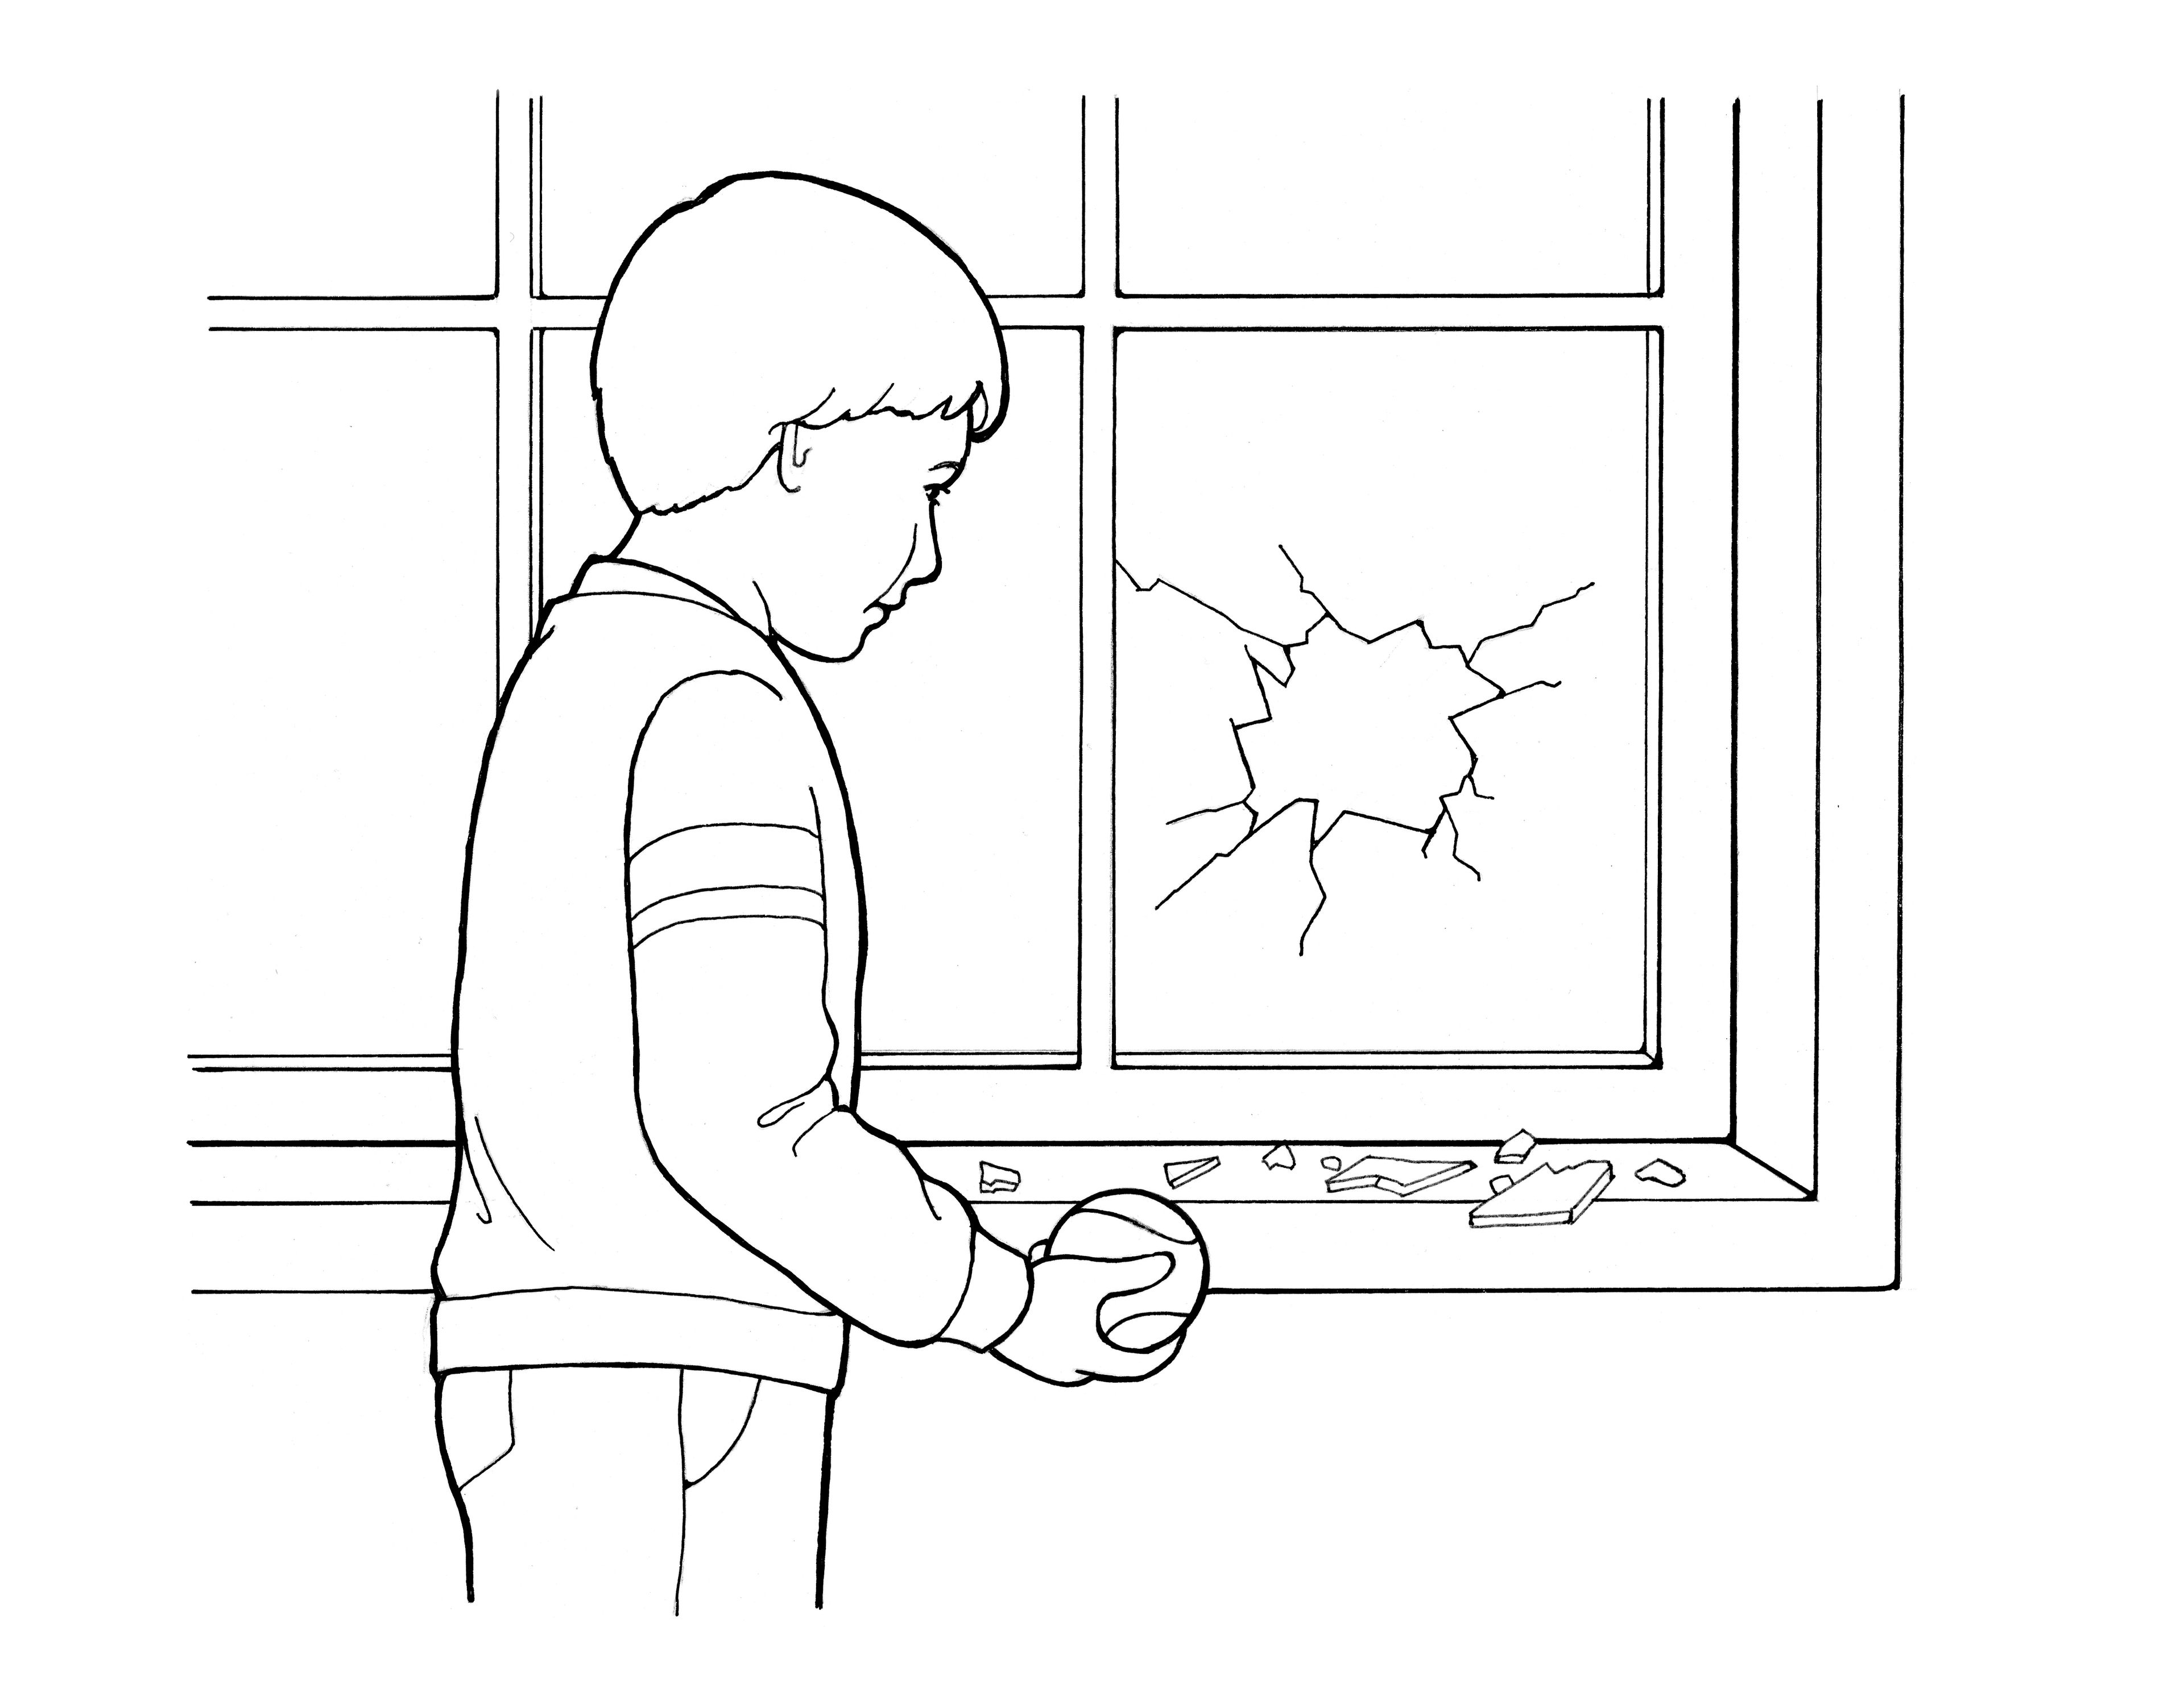 A line drawing of a boy who broke a window, showing the power of repentance.